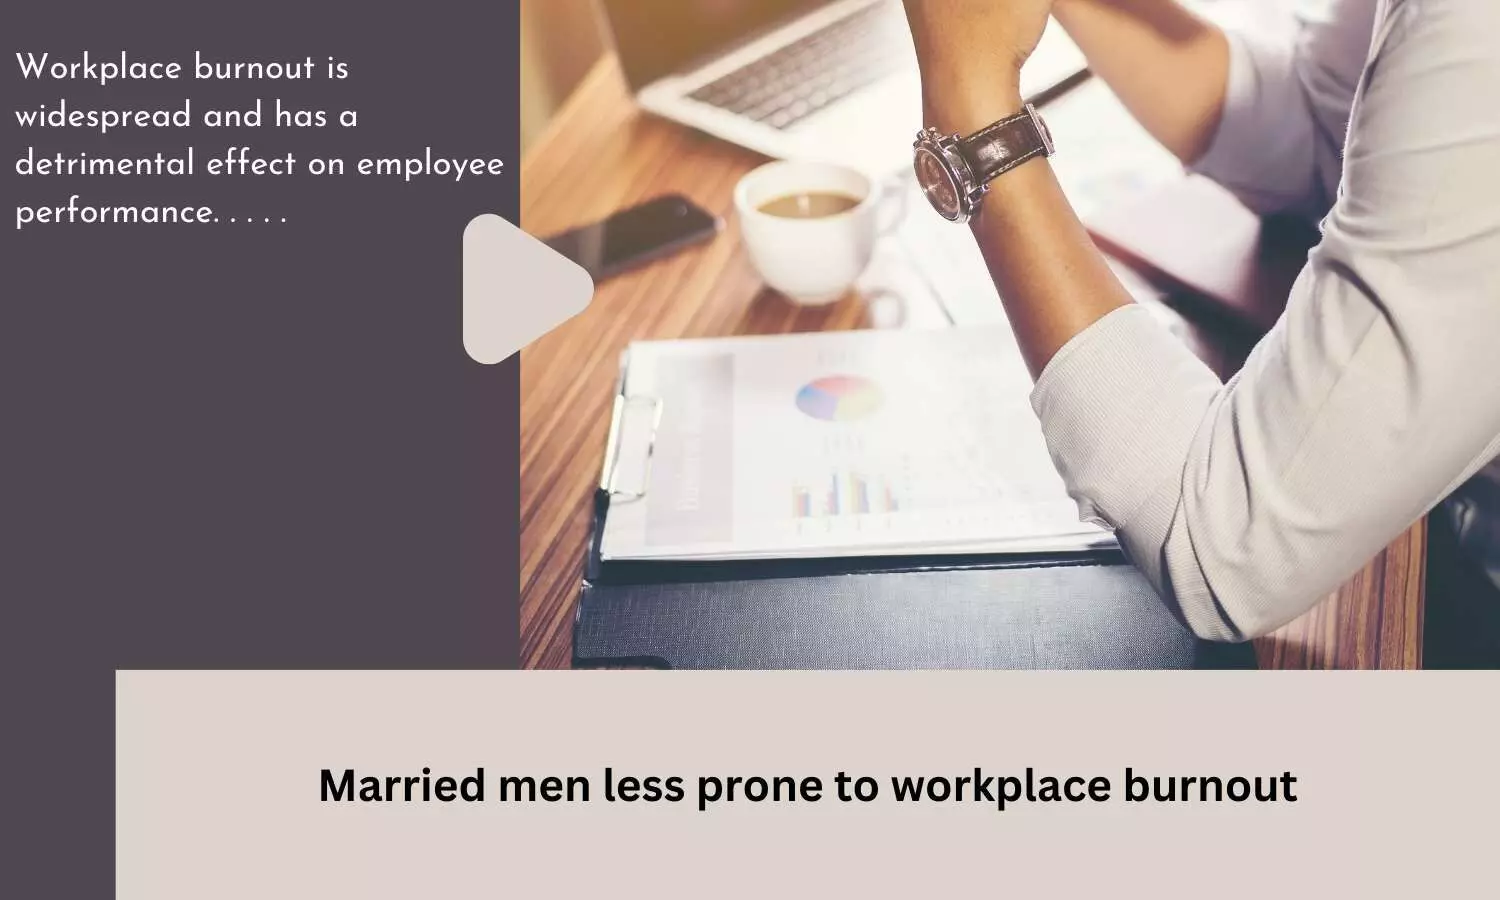 Married men less prone to workplace burnout